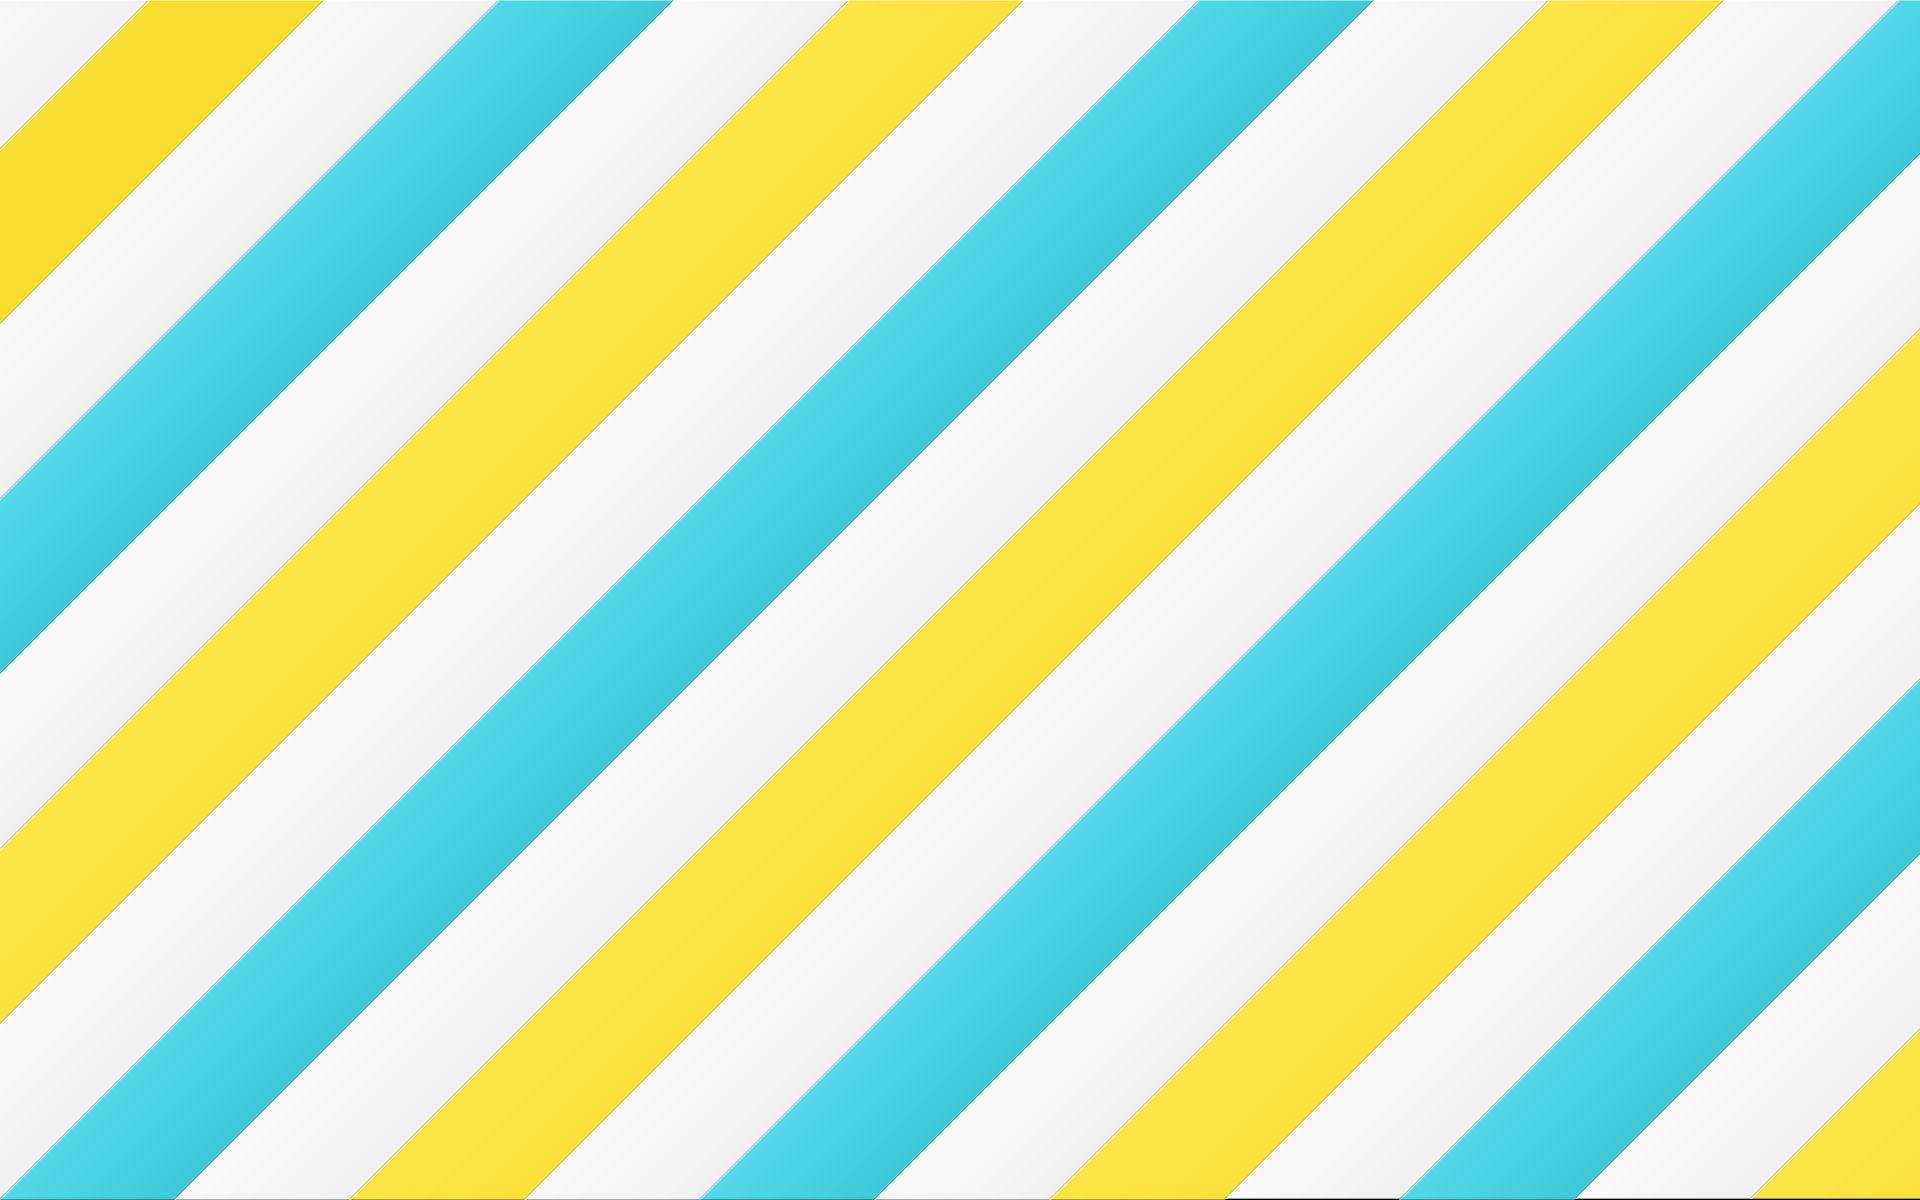 Wide HDQ Blue Yellow Abstract Wallpaper (43), BsnSCB.com